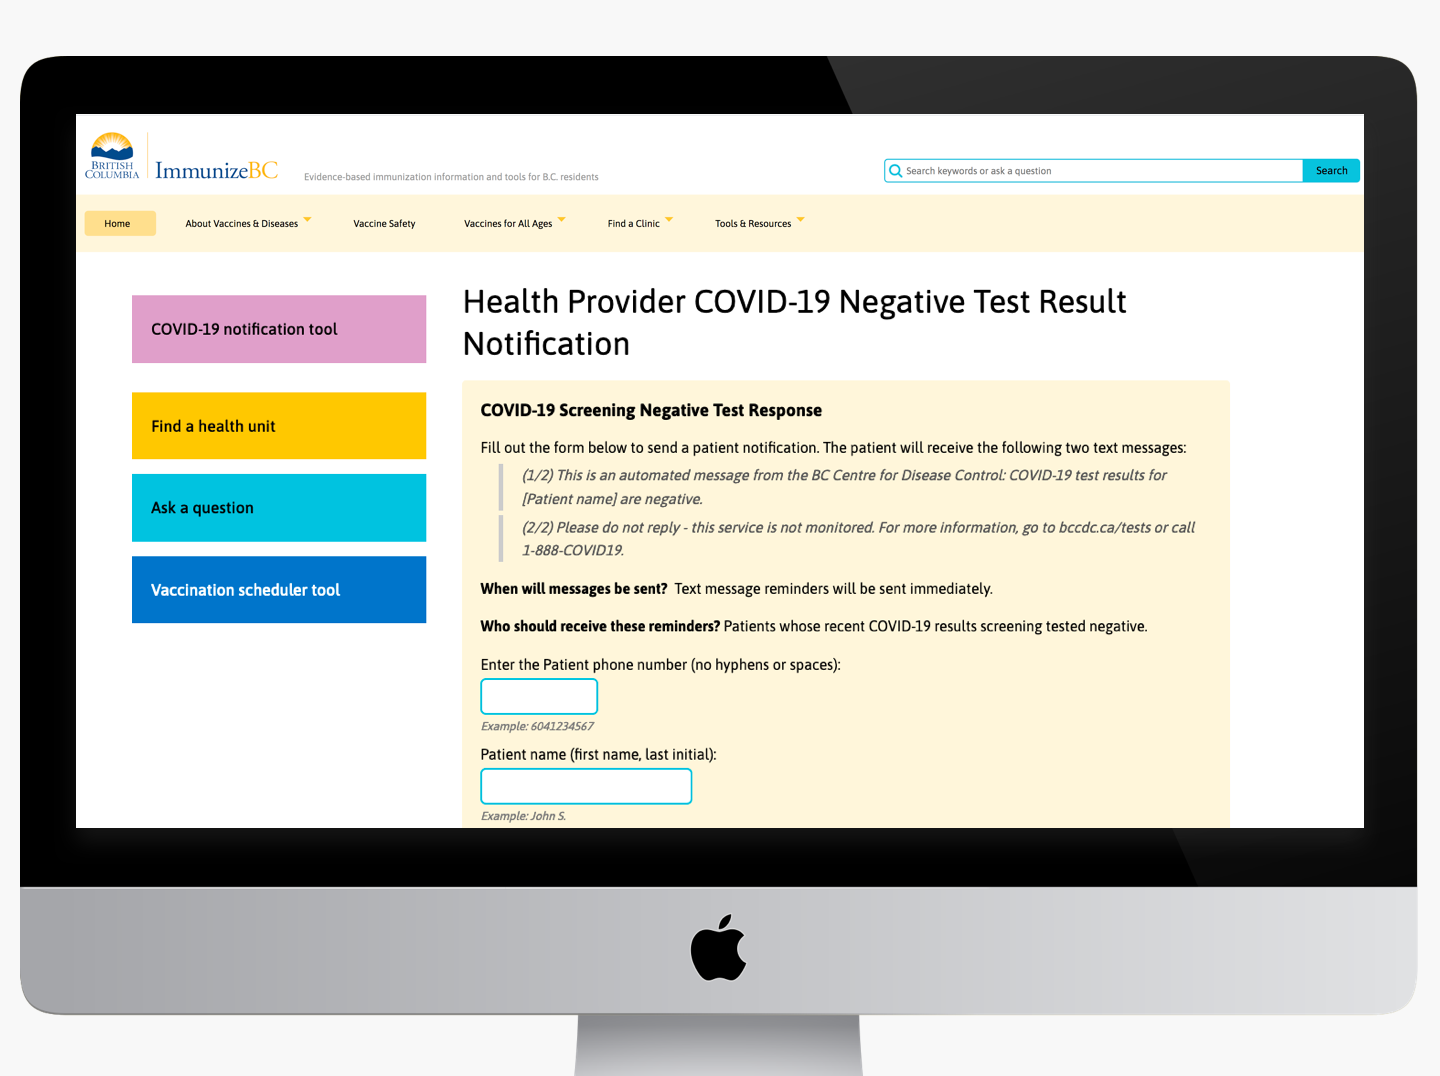 a screenshot image showing the tool that was built for health providers to send COVID19 Negative Test notification messages to patients 